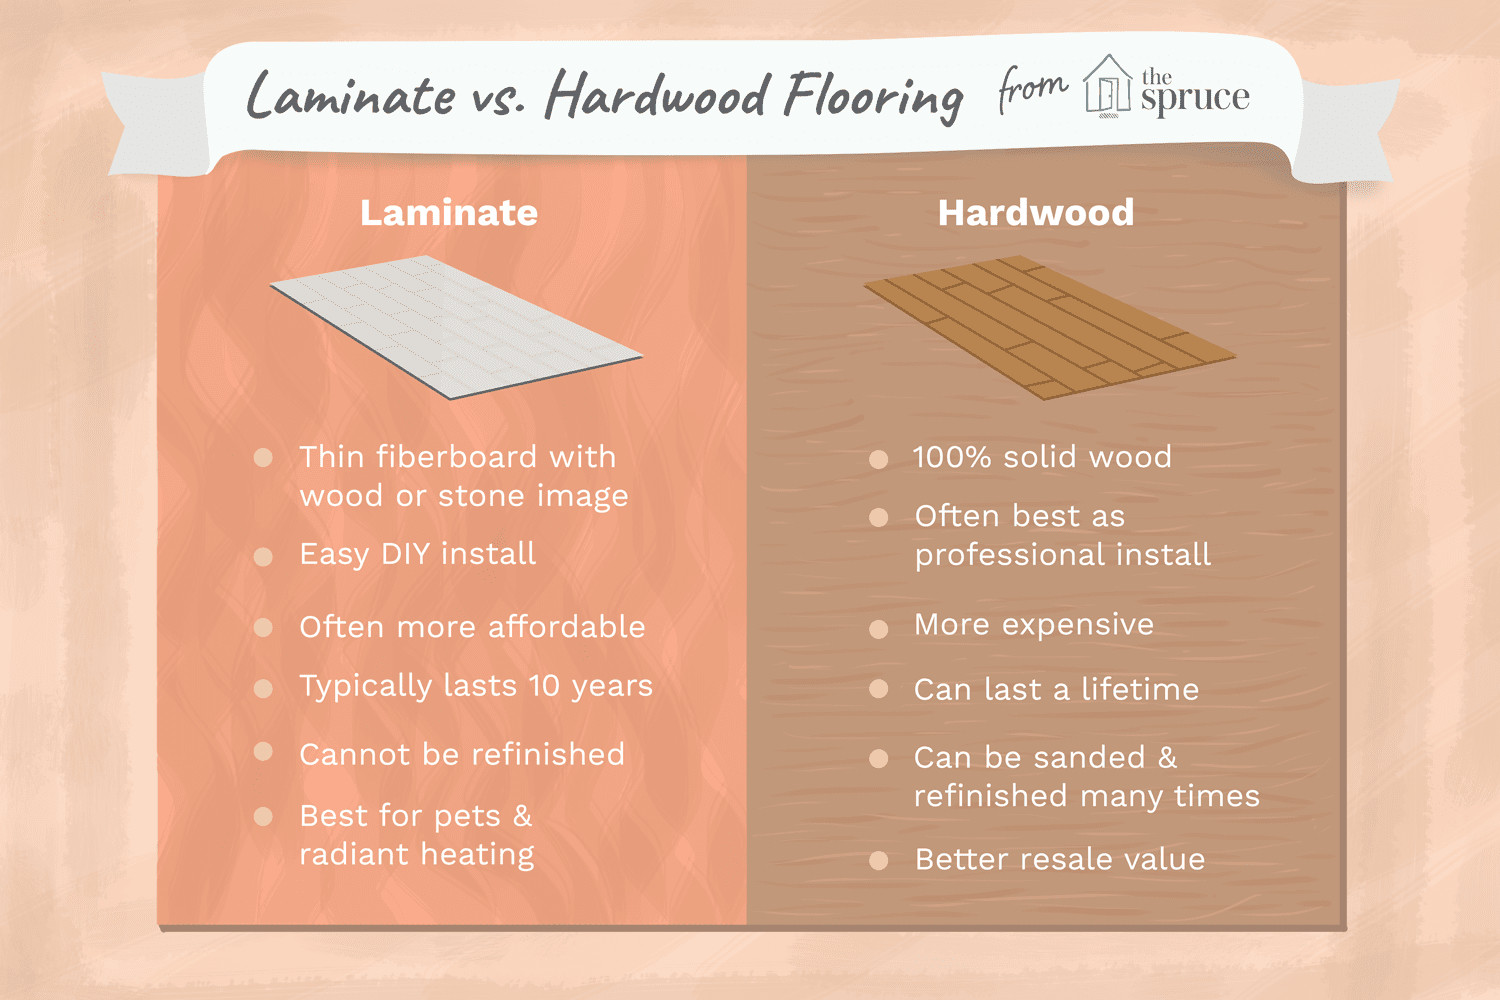 17 Lovable Cork Vs Hardwood Flooring Cost 2024 free download cork vs hardwood flooring cost of laminate vs hardwood doesnt have to be a hard decision inside laminate vs hardwood flooring how they compare 1821870 final 5bae84f24cedfd0026f4205d